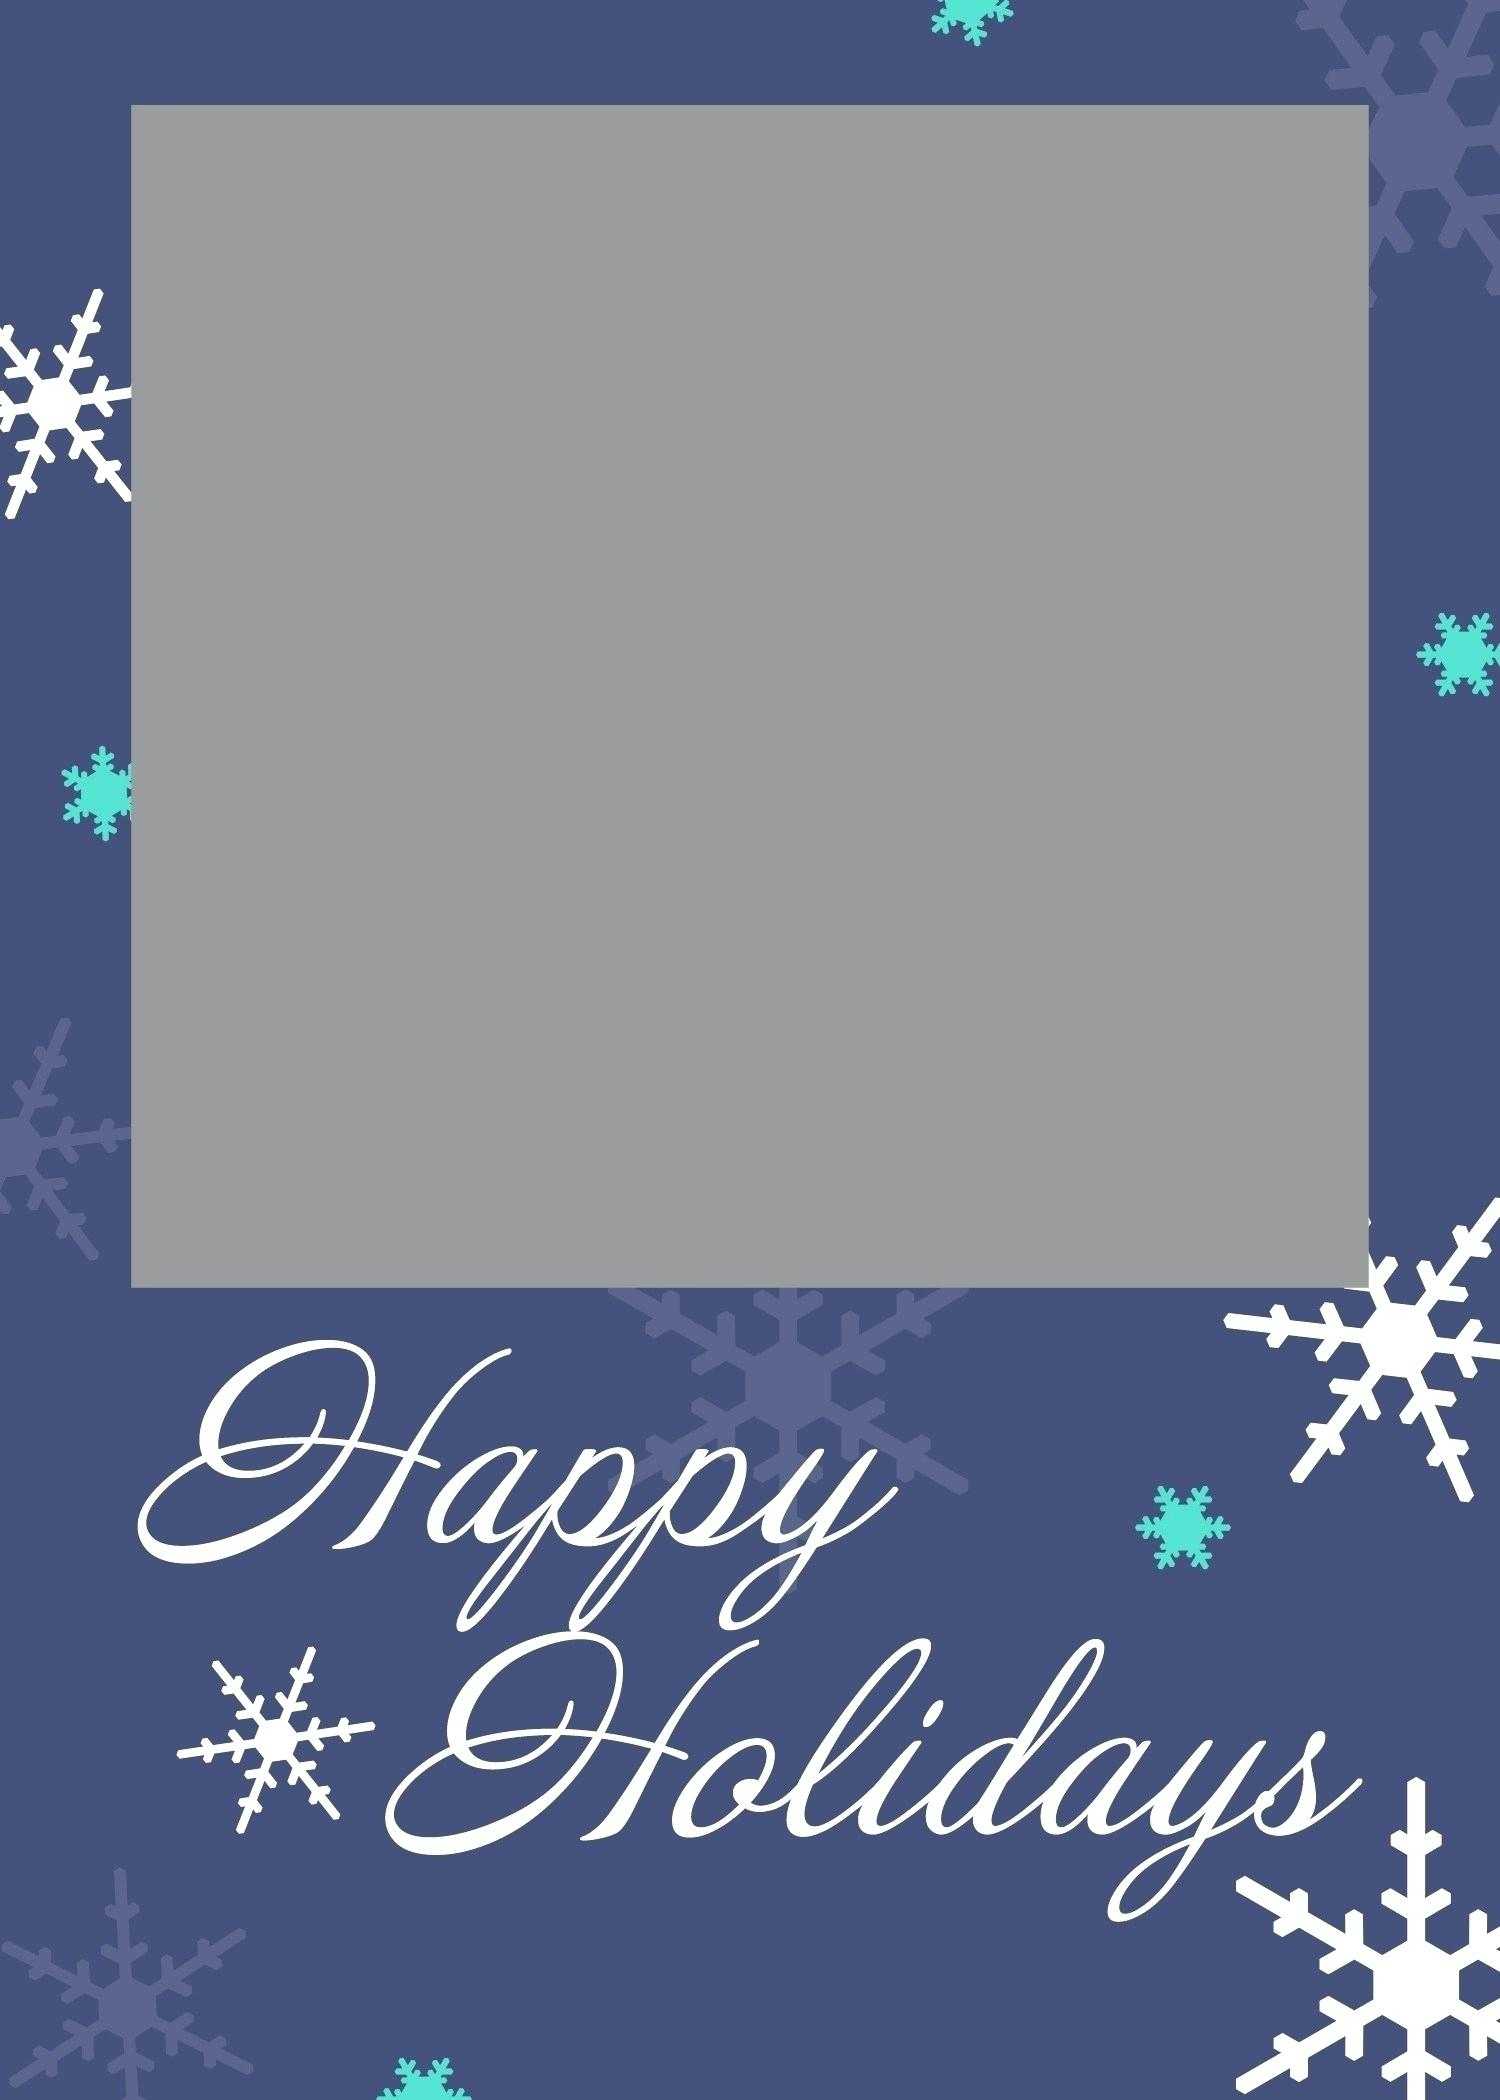 Free Holiday Card Templates Business Template Save Of Unique Regarding Free Holiday Photo Card Templates